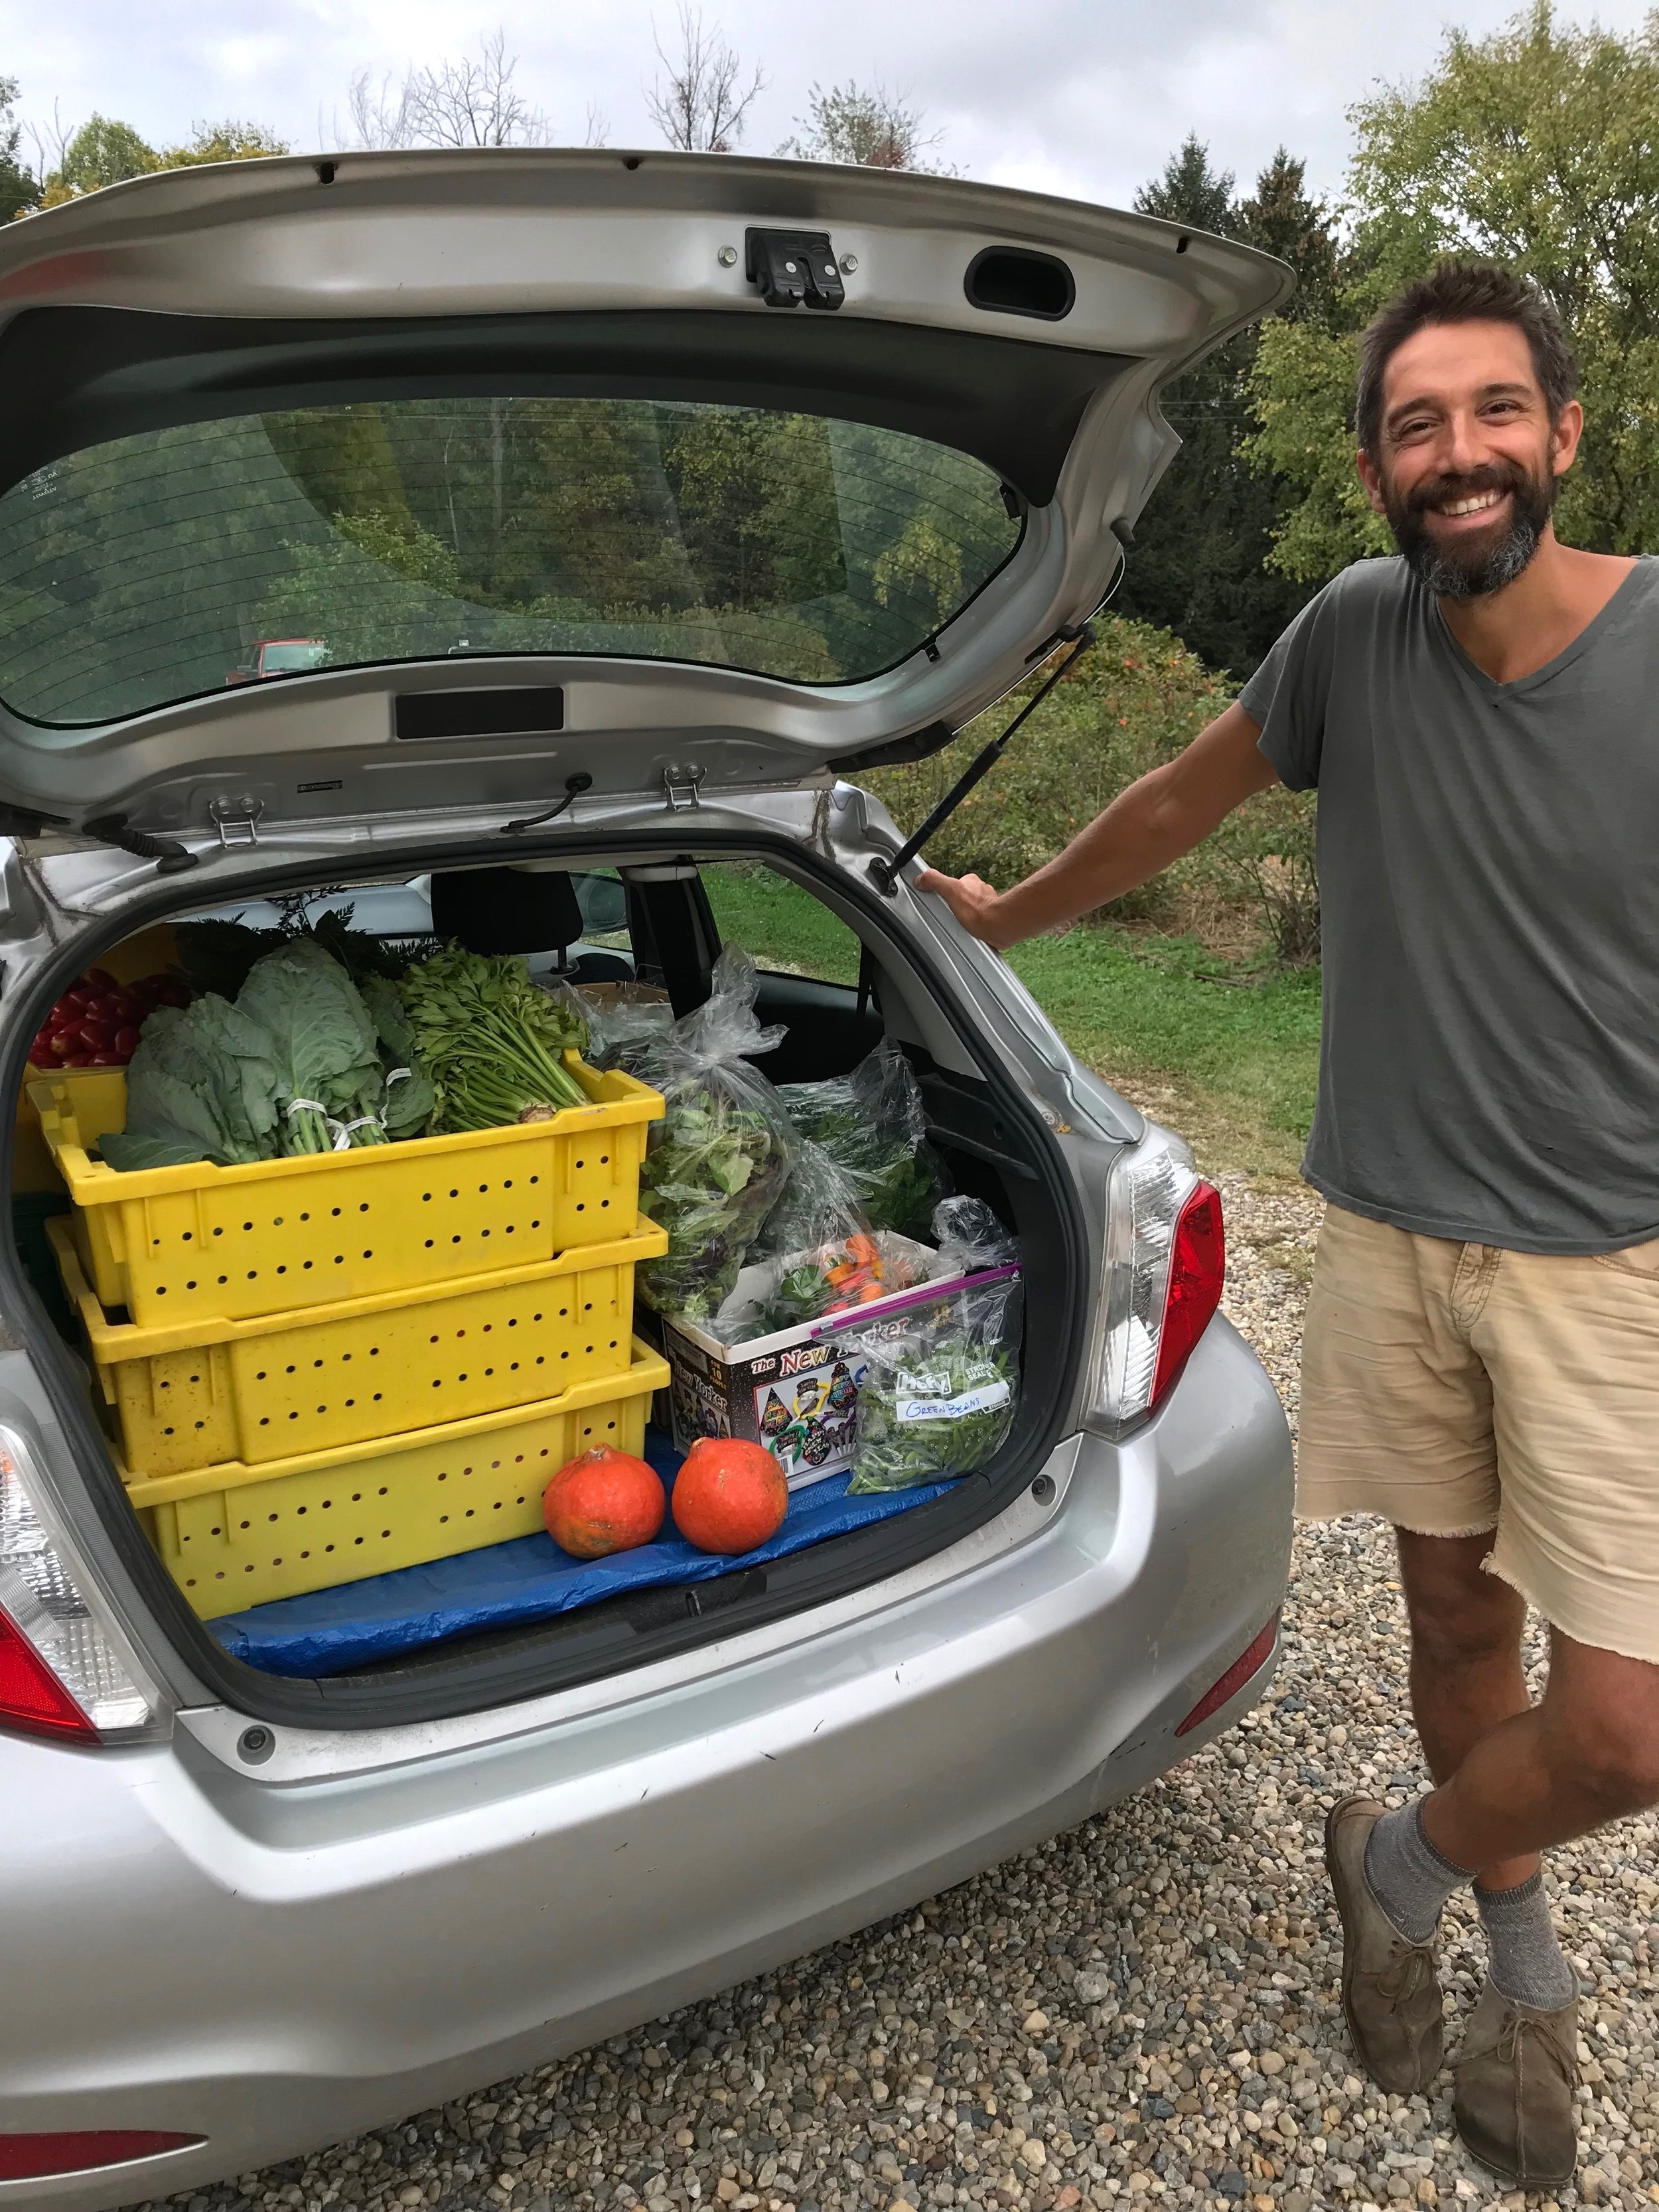  Farmer Billy with a carload of produce donations 